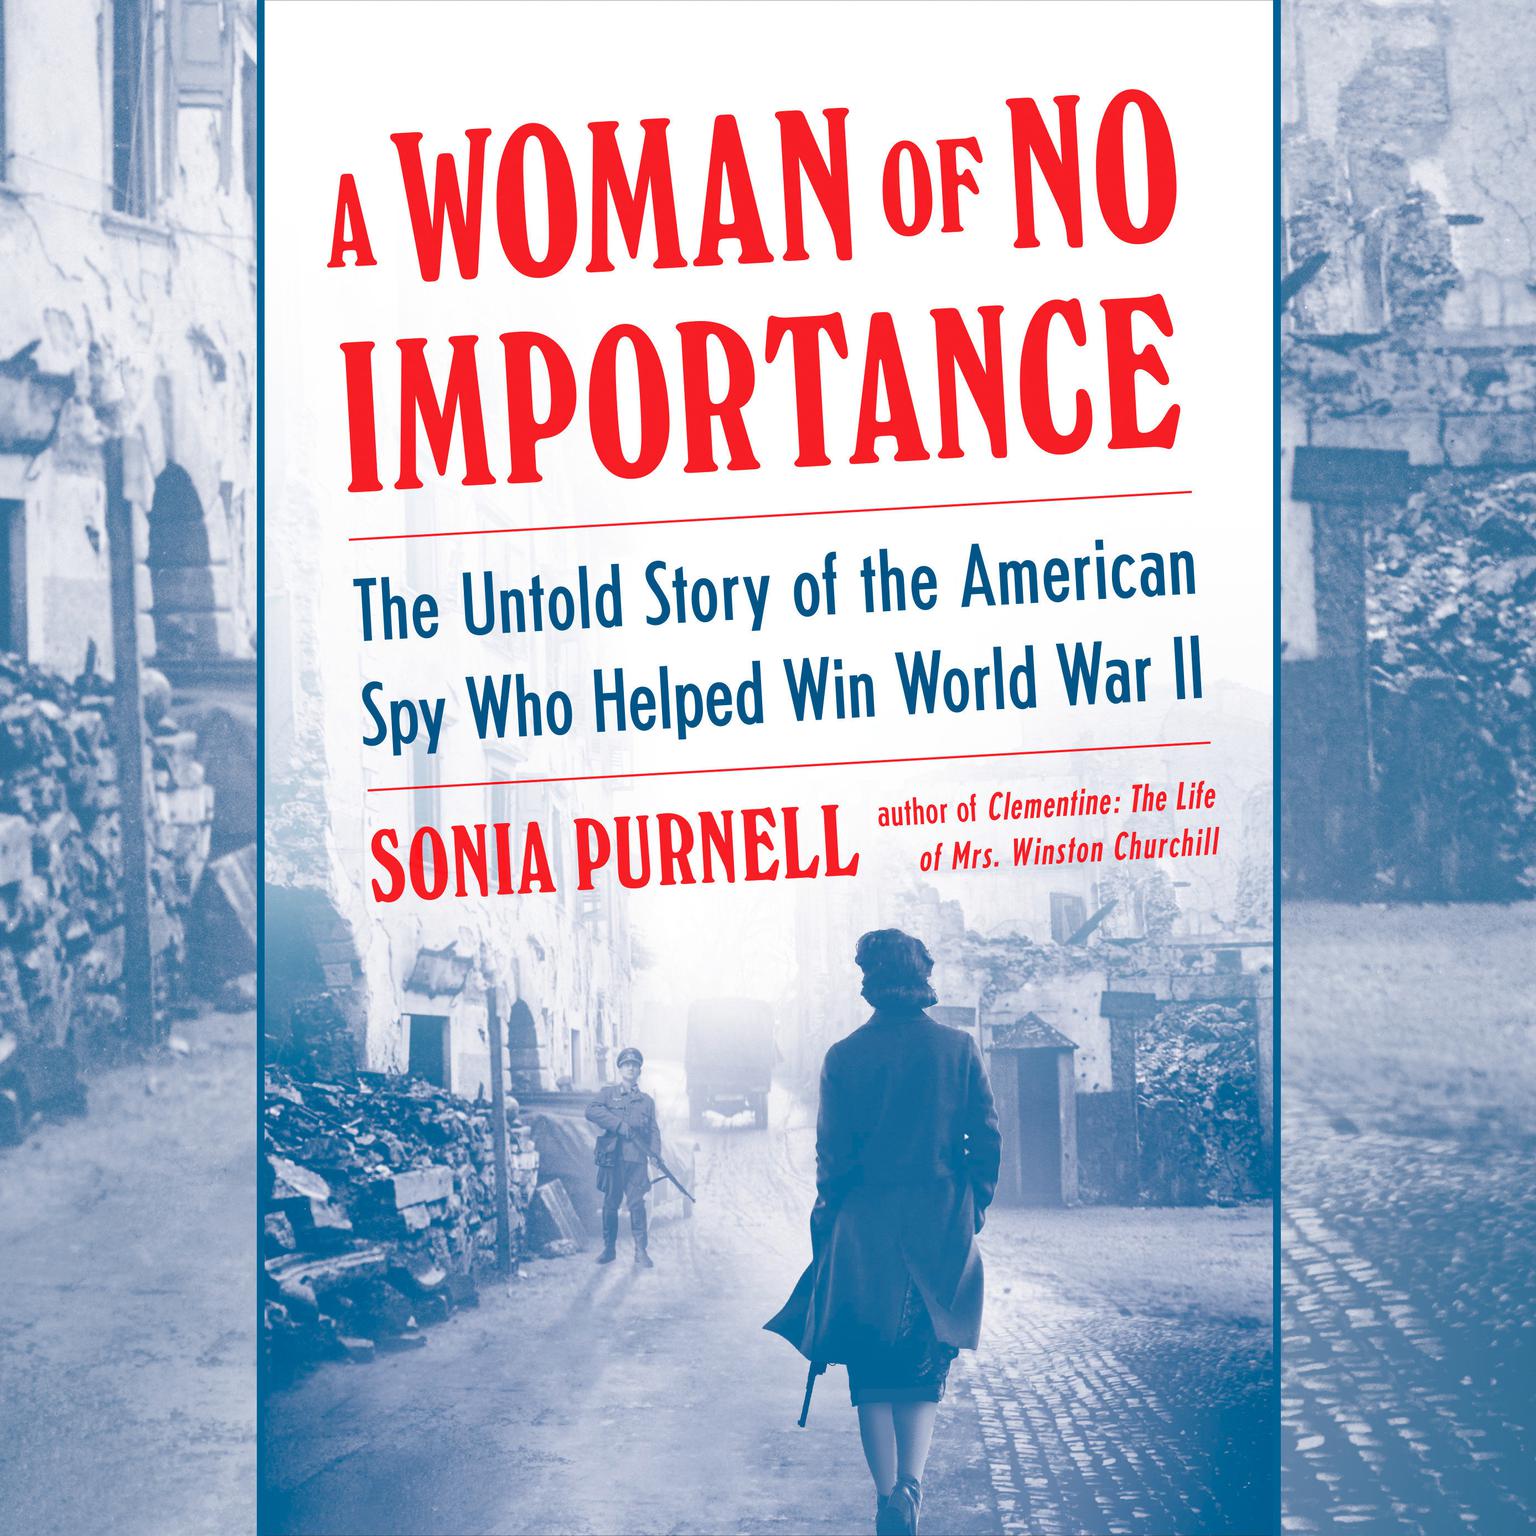 A Woman of No Importance: The Untold Story of the American Spy Who Helped Win World War II Audiobook, by Sonia Purnell